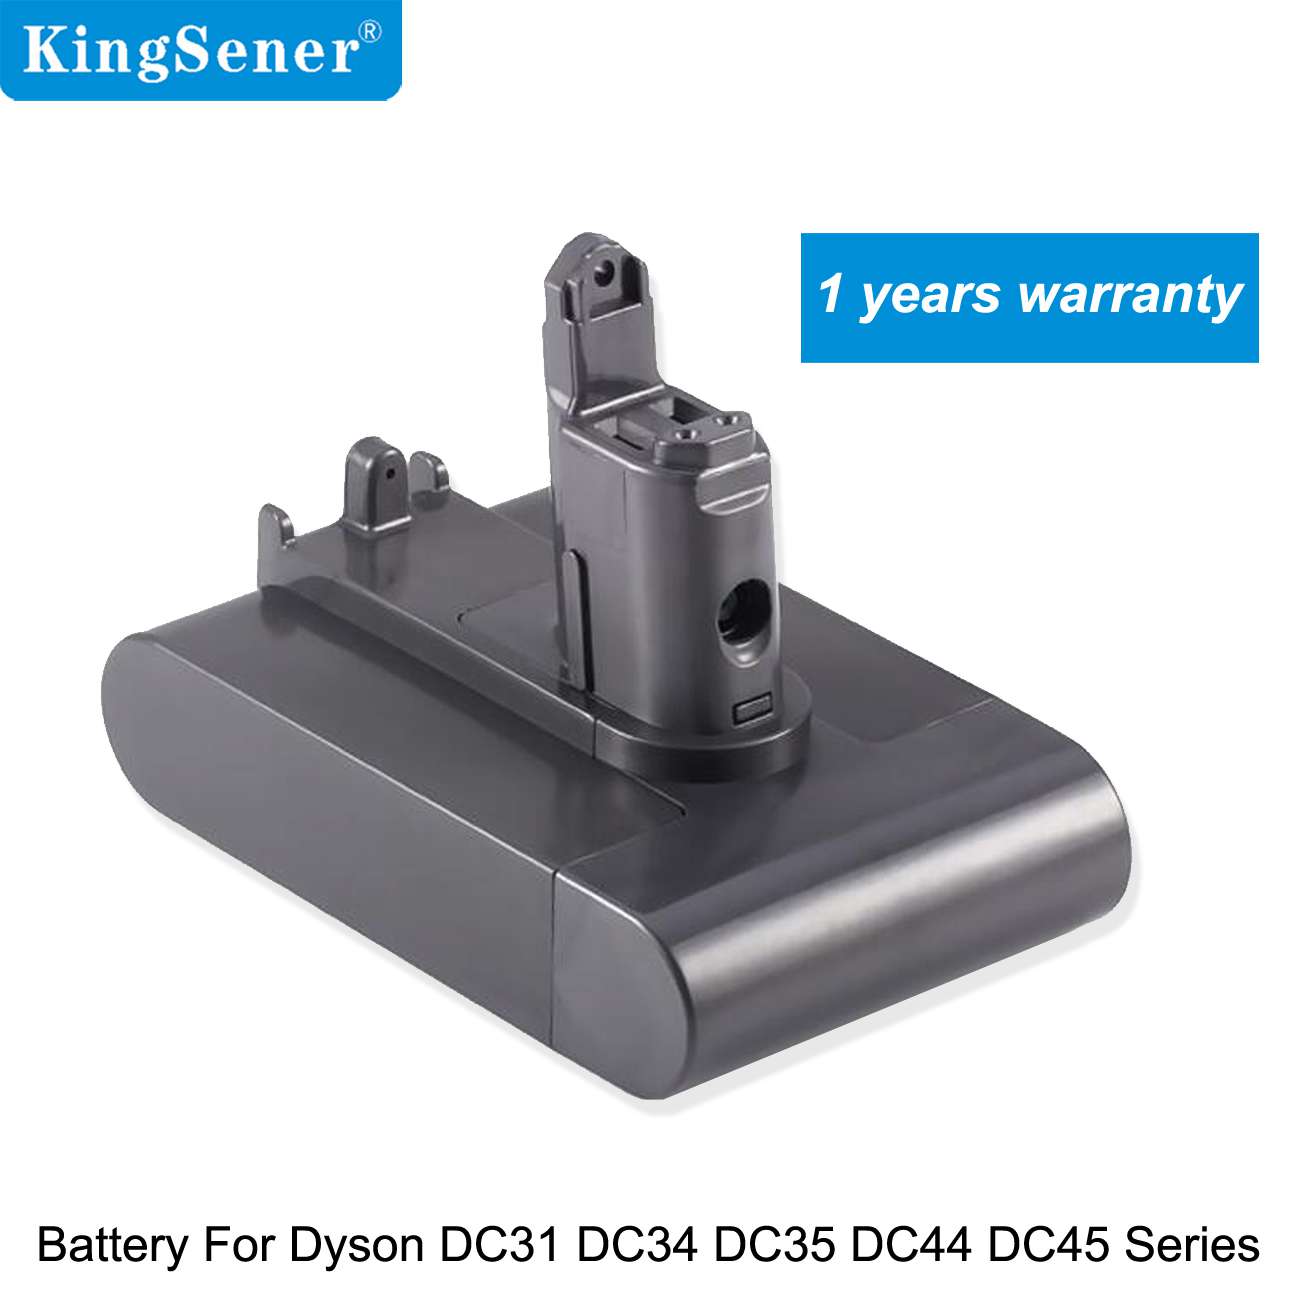 Kingsener DC34 Type B Replacement for DC35 DC31 DC3 BatteryMall.com